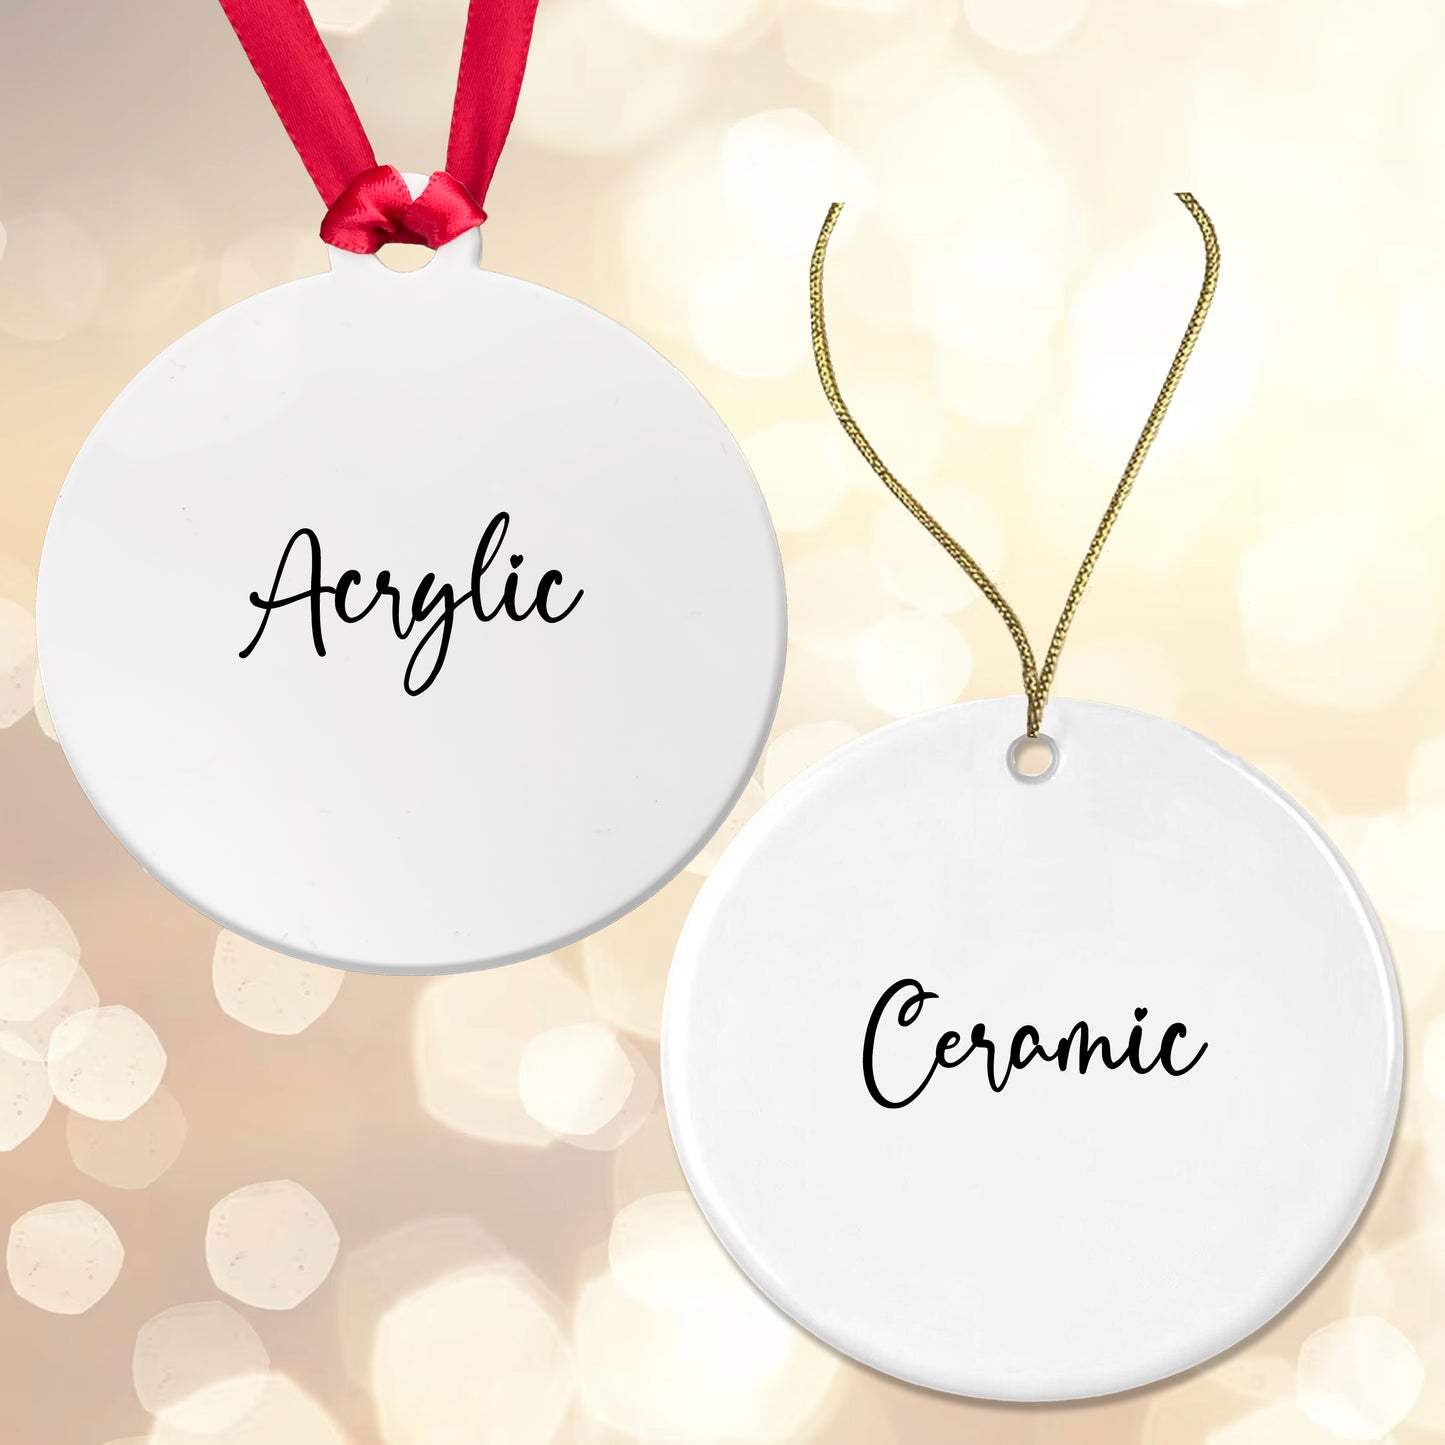 SURNAME Family Christmas Bauble Whole Family Tree Decoration